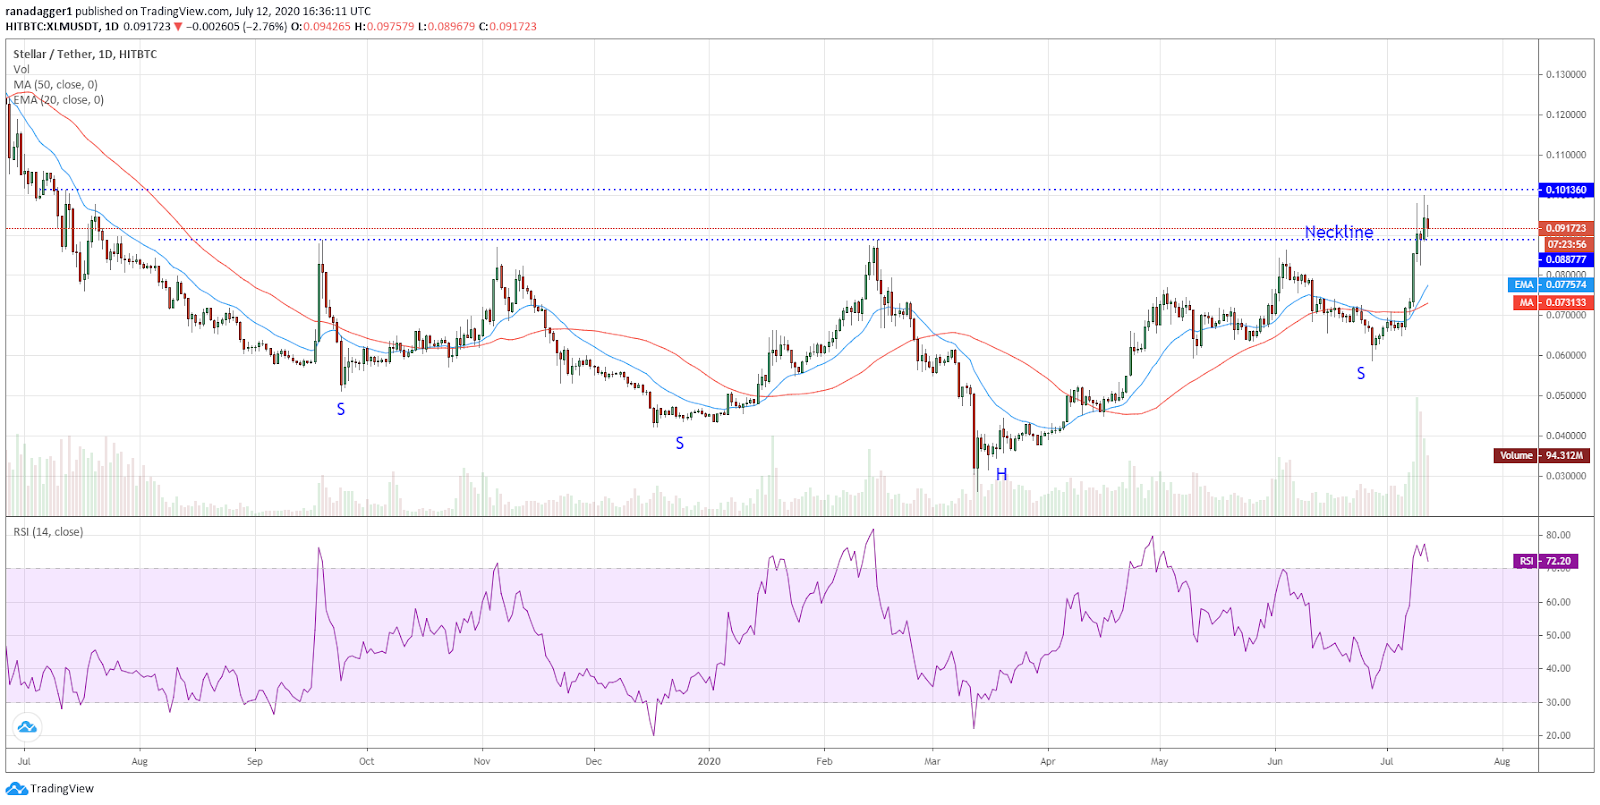 XLM/USD daily chart. Source: TradingView​​​​​​​